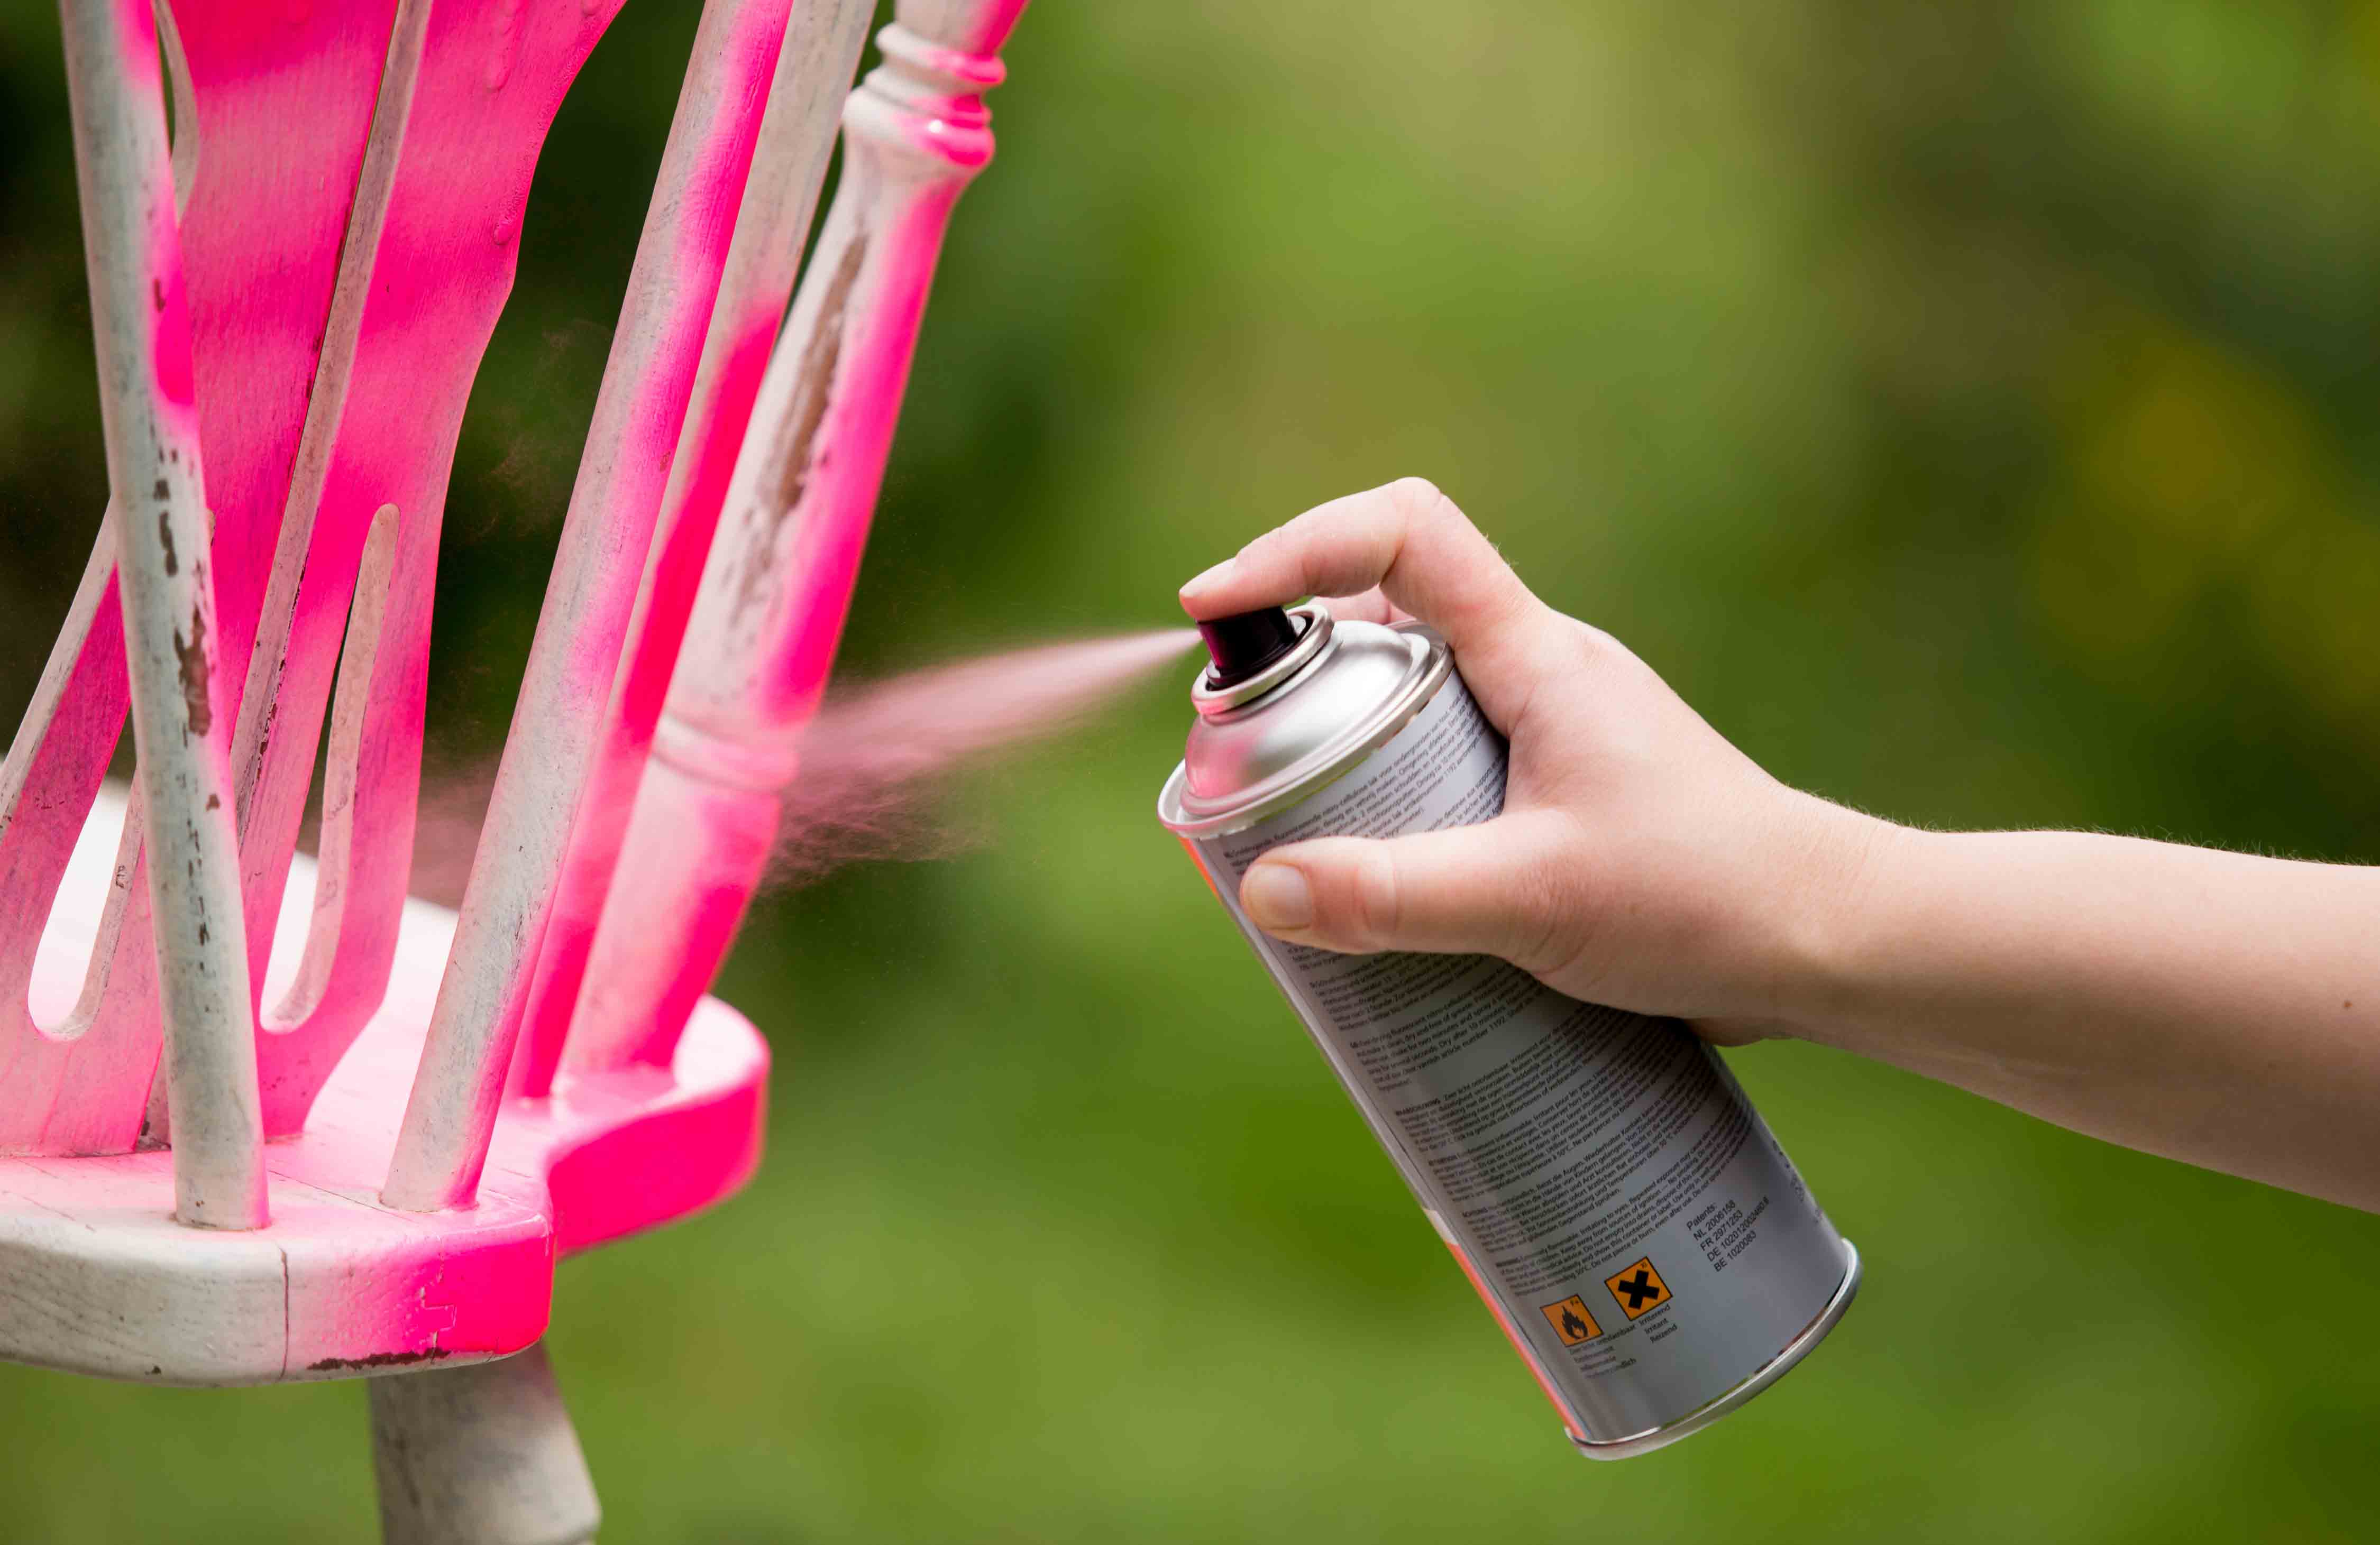 10 things you need to know before spray painting